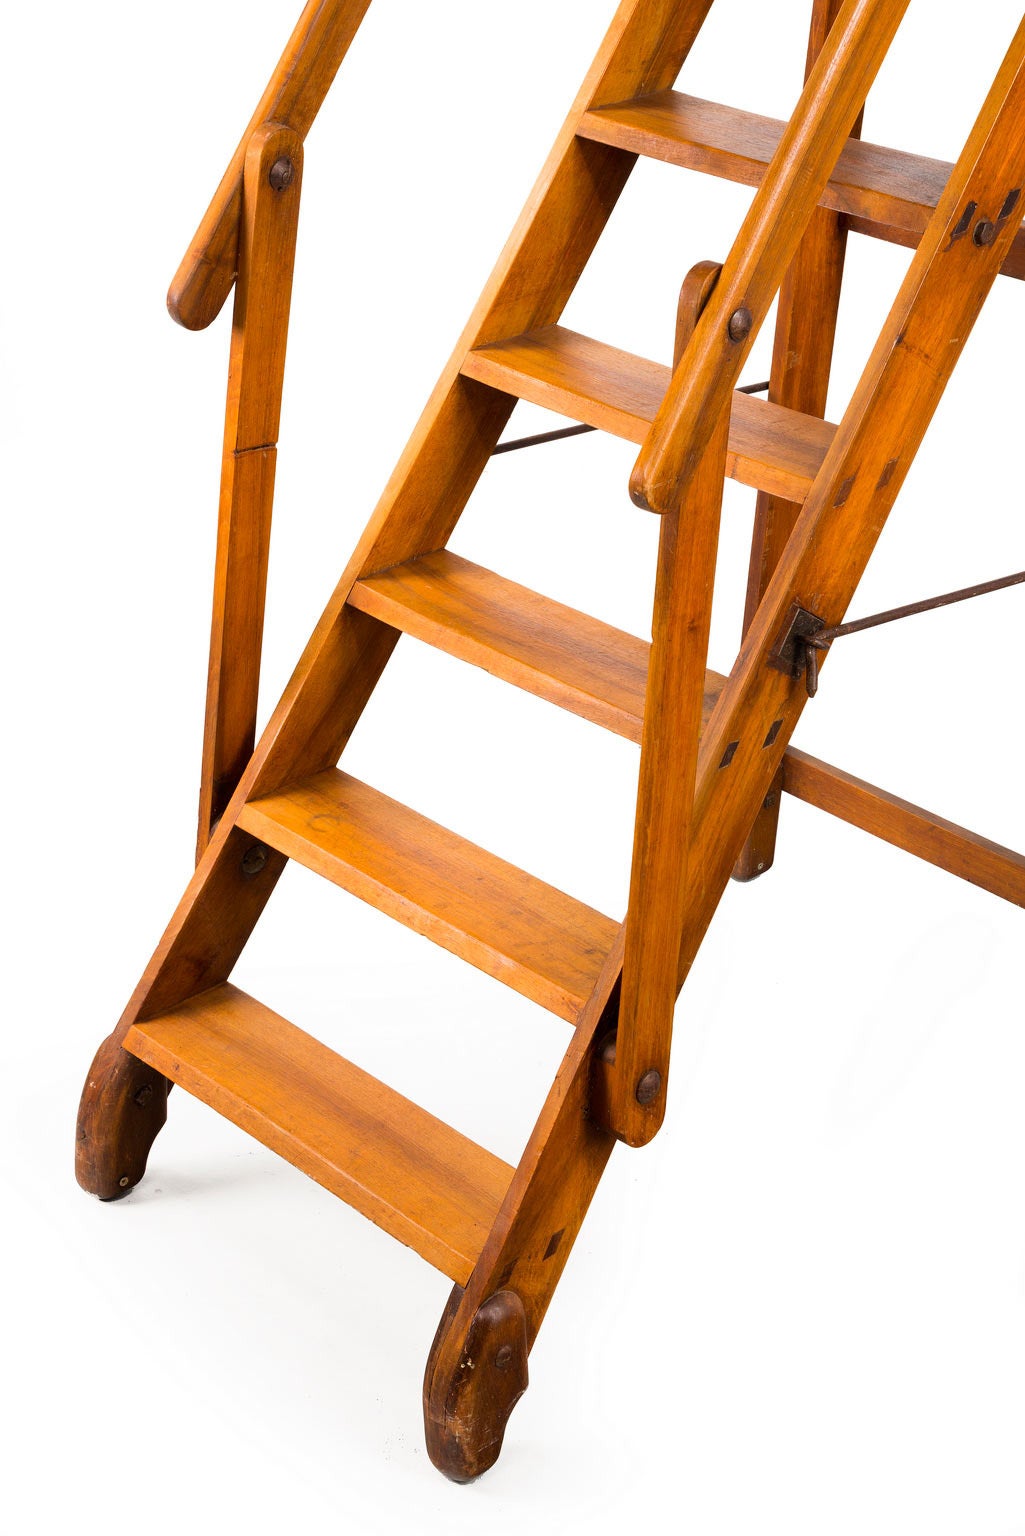 Early 20th Century Walnut Folding Library Ladder In Excellent Condition In Peterborough, Northamptonshire